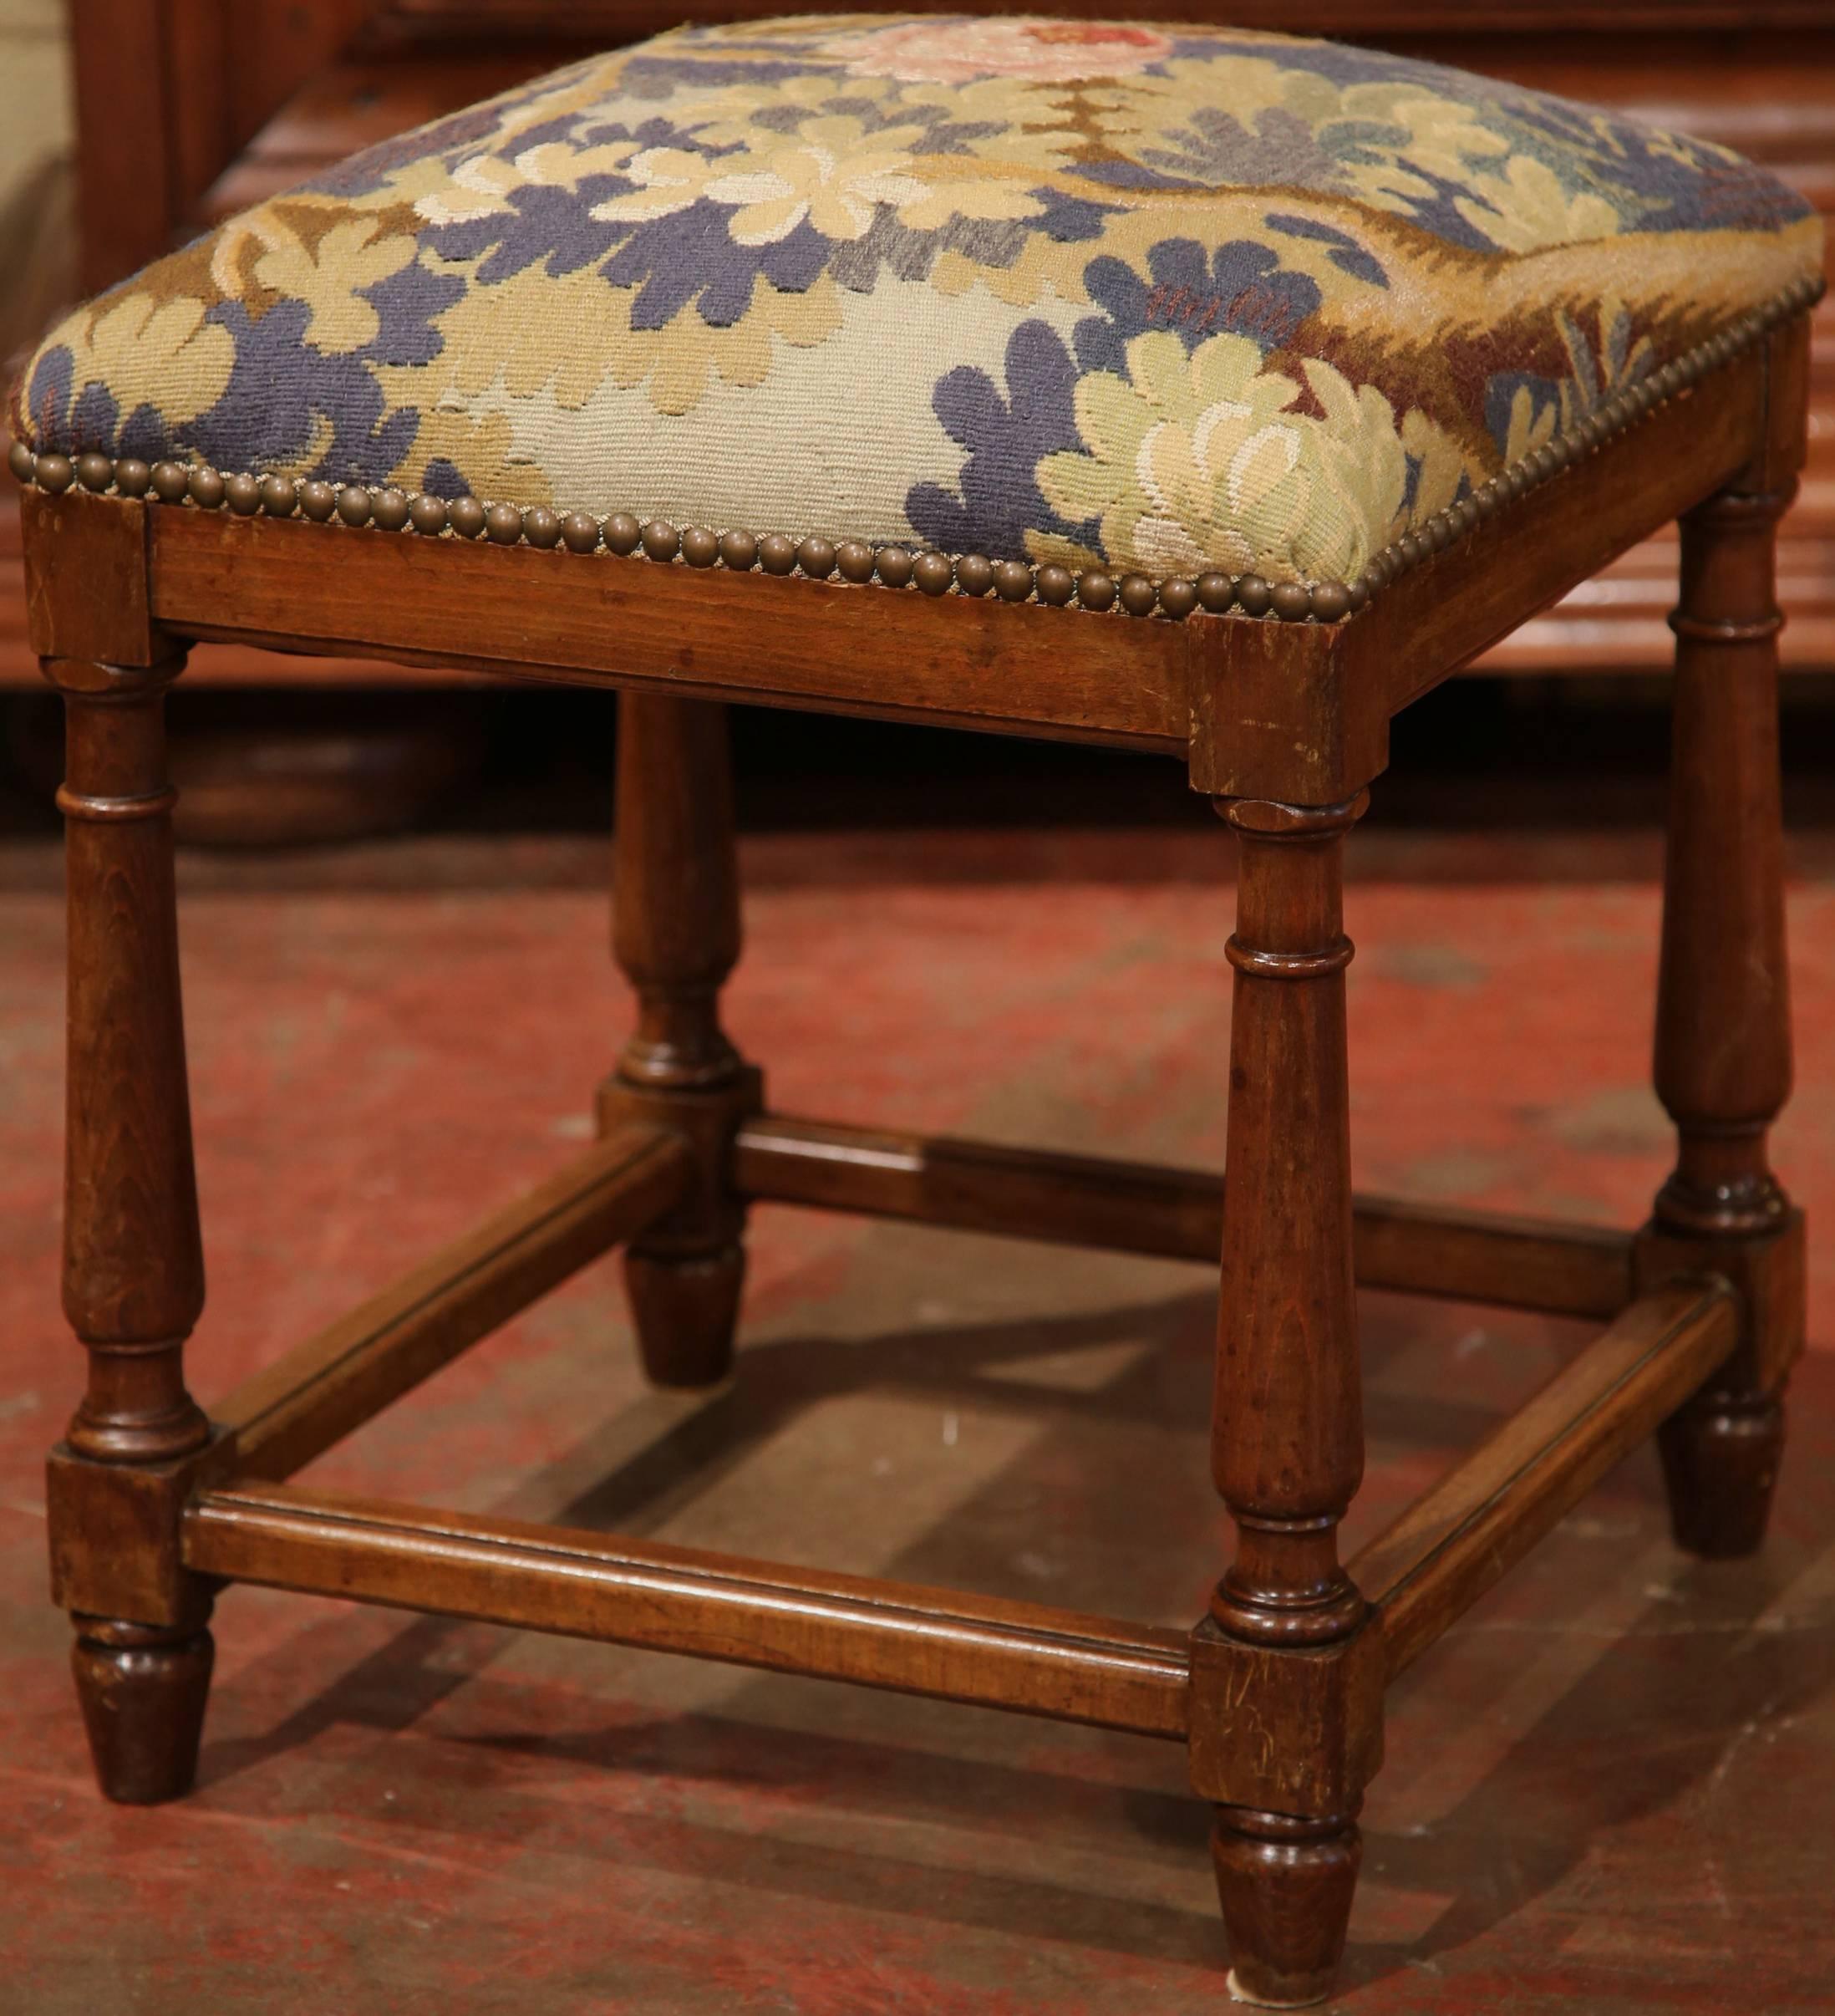 18th Century Pair of Mid-19th Century, French Square Walnut Stools with Aubusson Tapestry